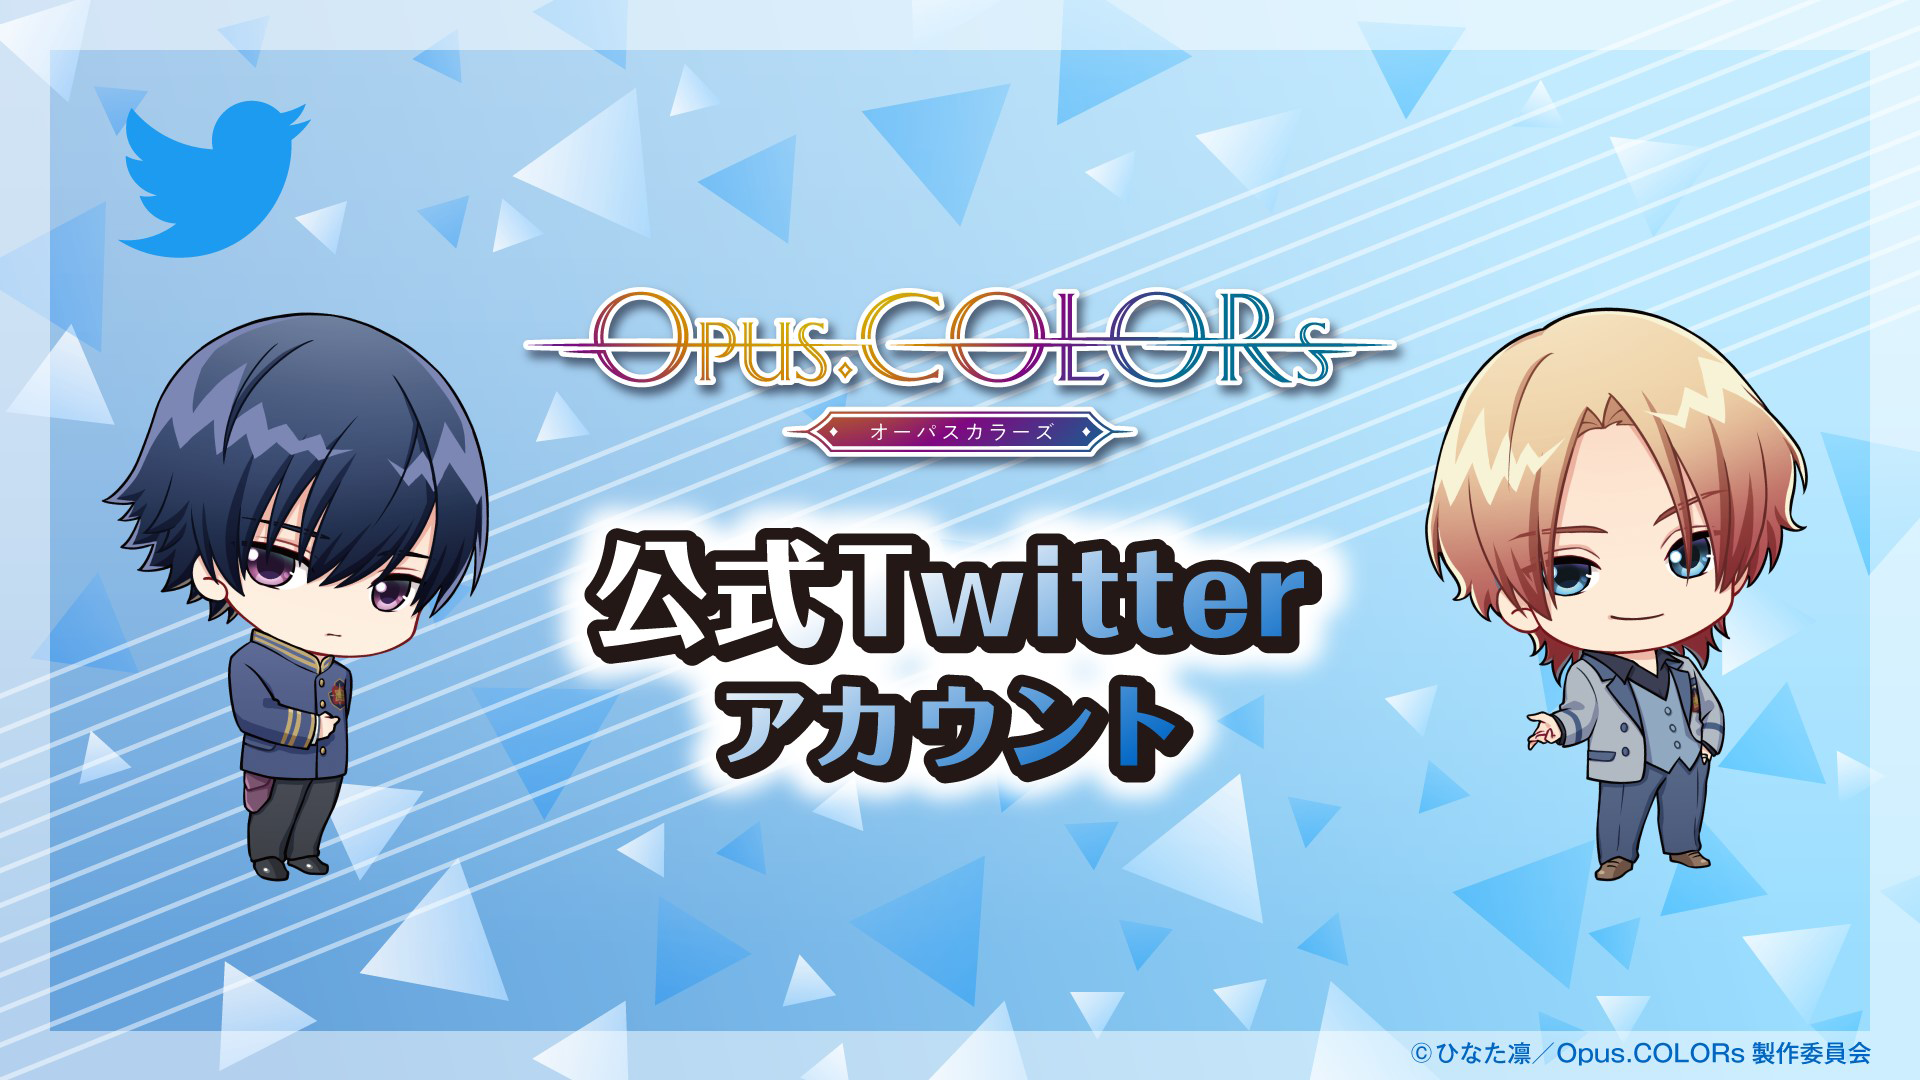 opus-colors OFFICIAL X（Twitter） ACCOUNT